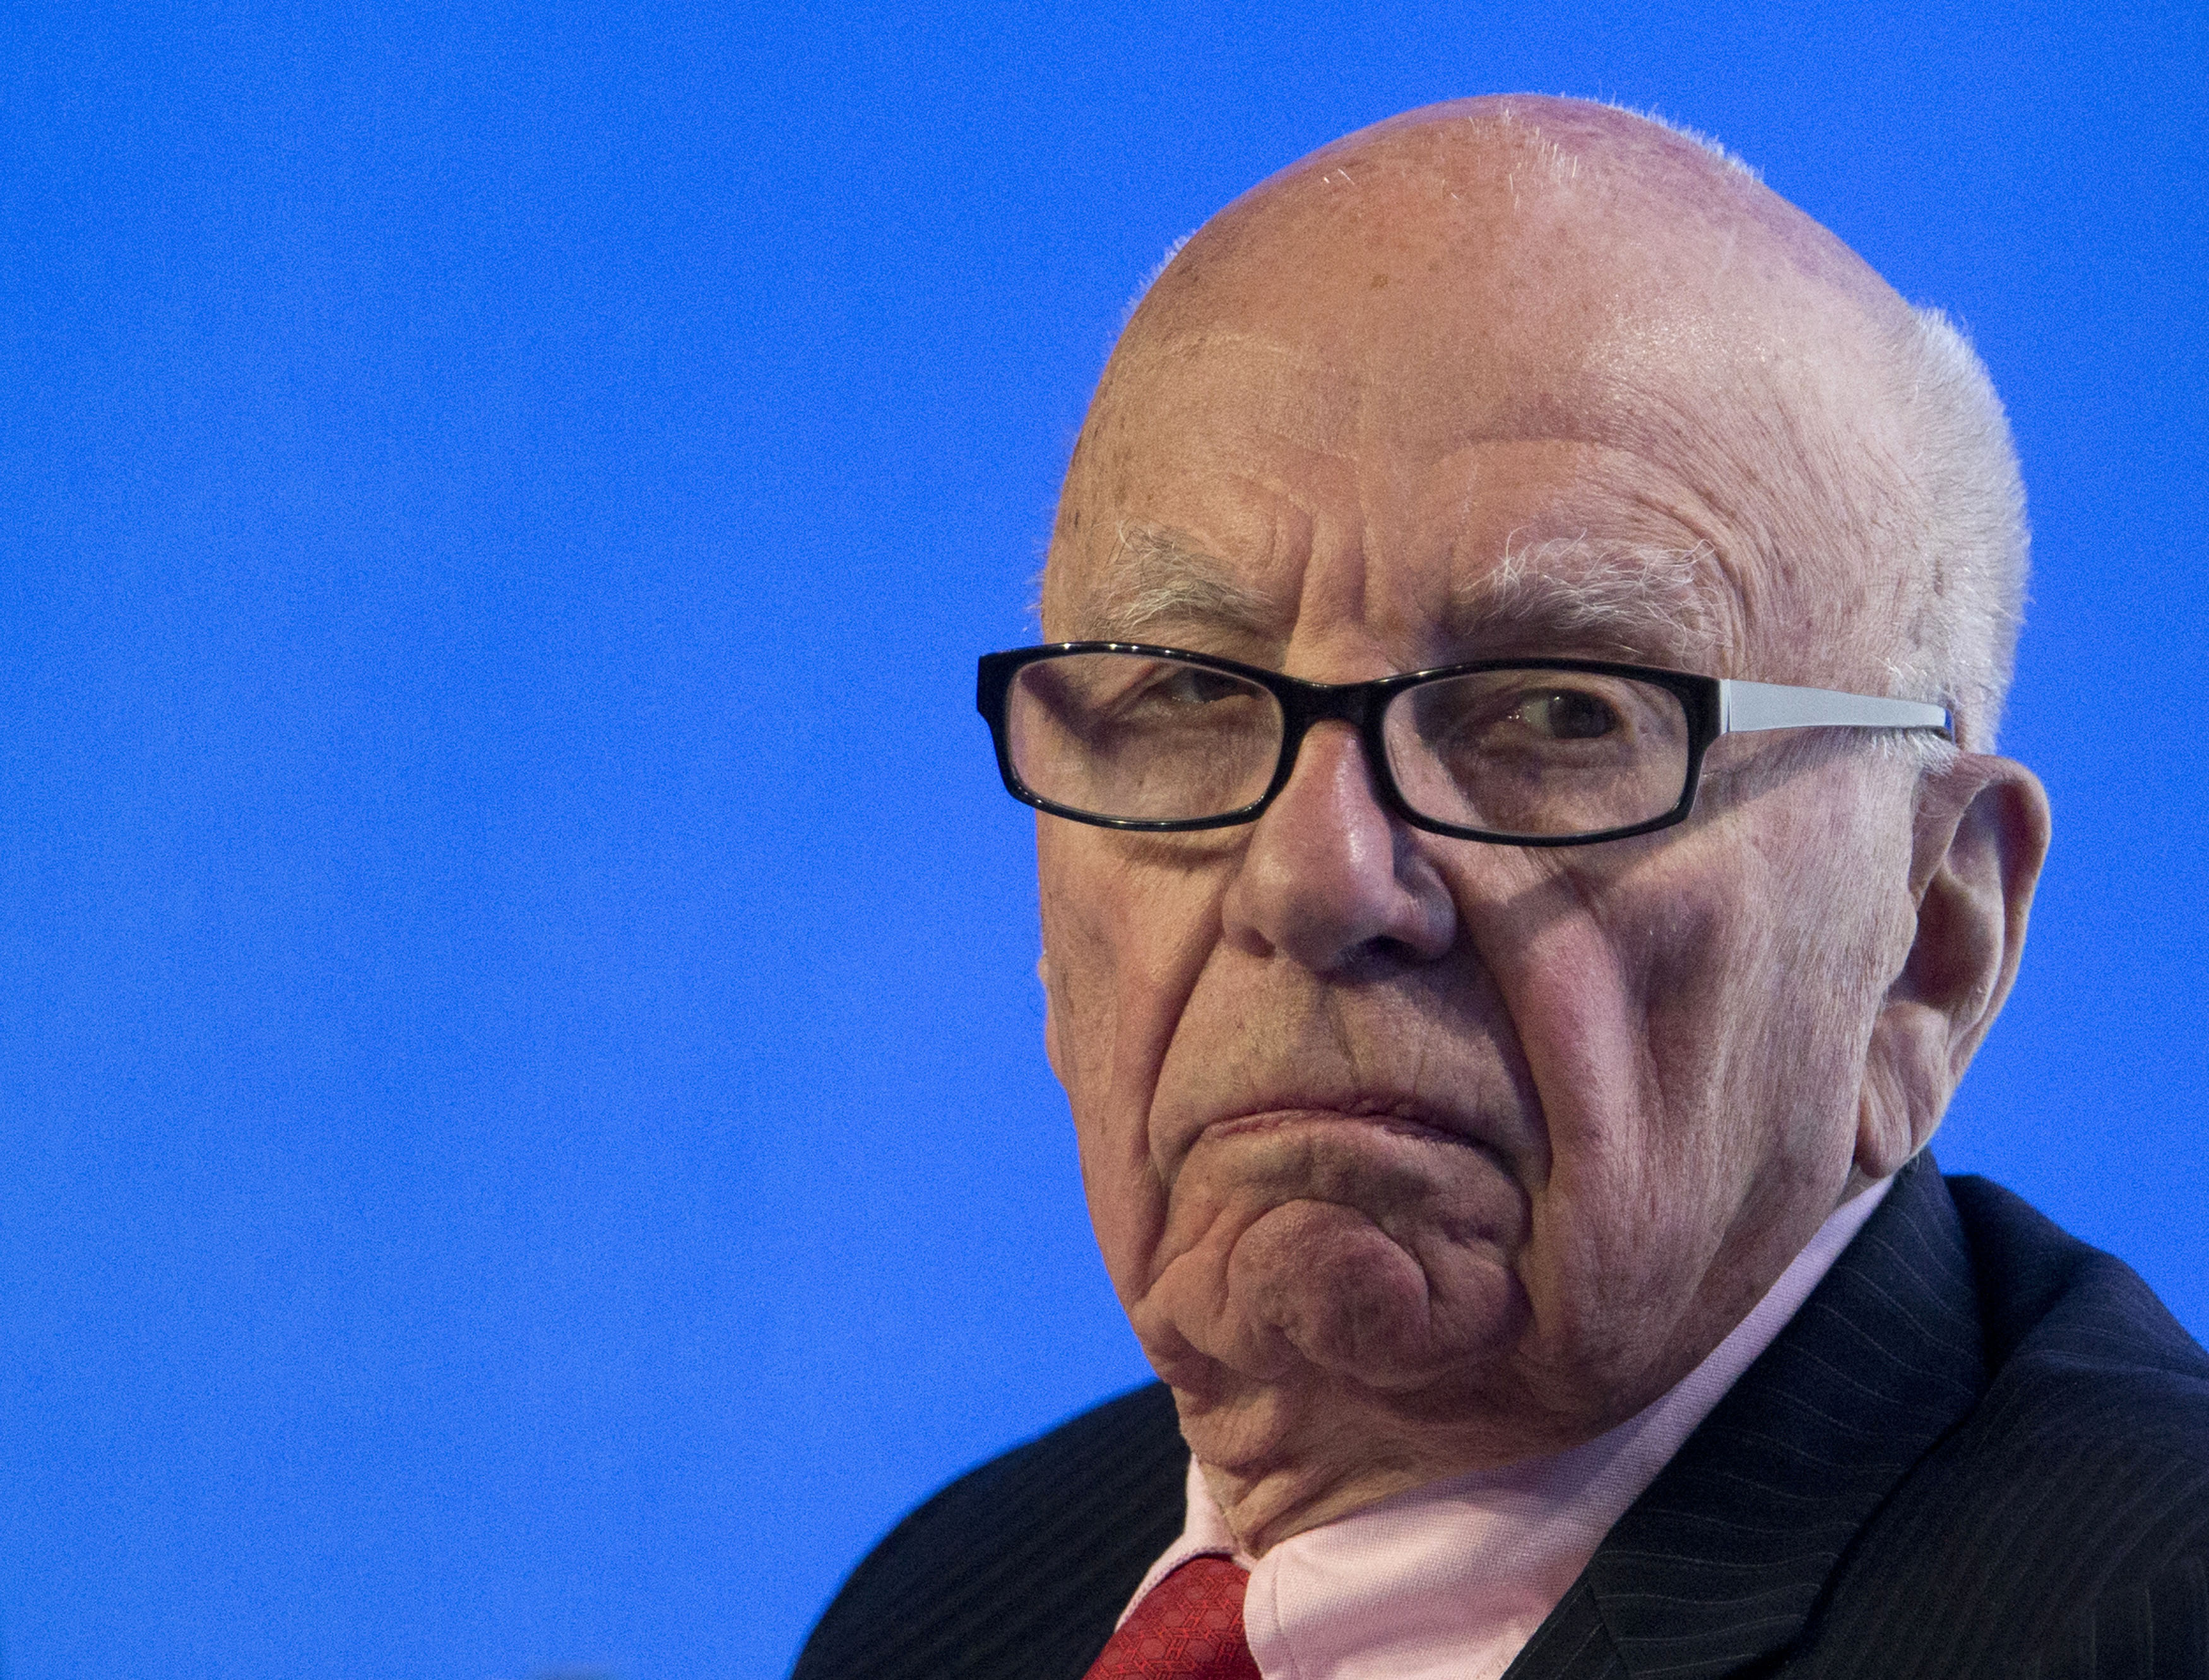 Rupert Murdoch, Executive Chairman News Corporation looks on during a panel discussion at the B20 meeting of company CEO's on July 17, 2014 in Sydney, Australia. (Pool—Getty Images)